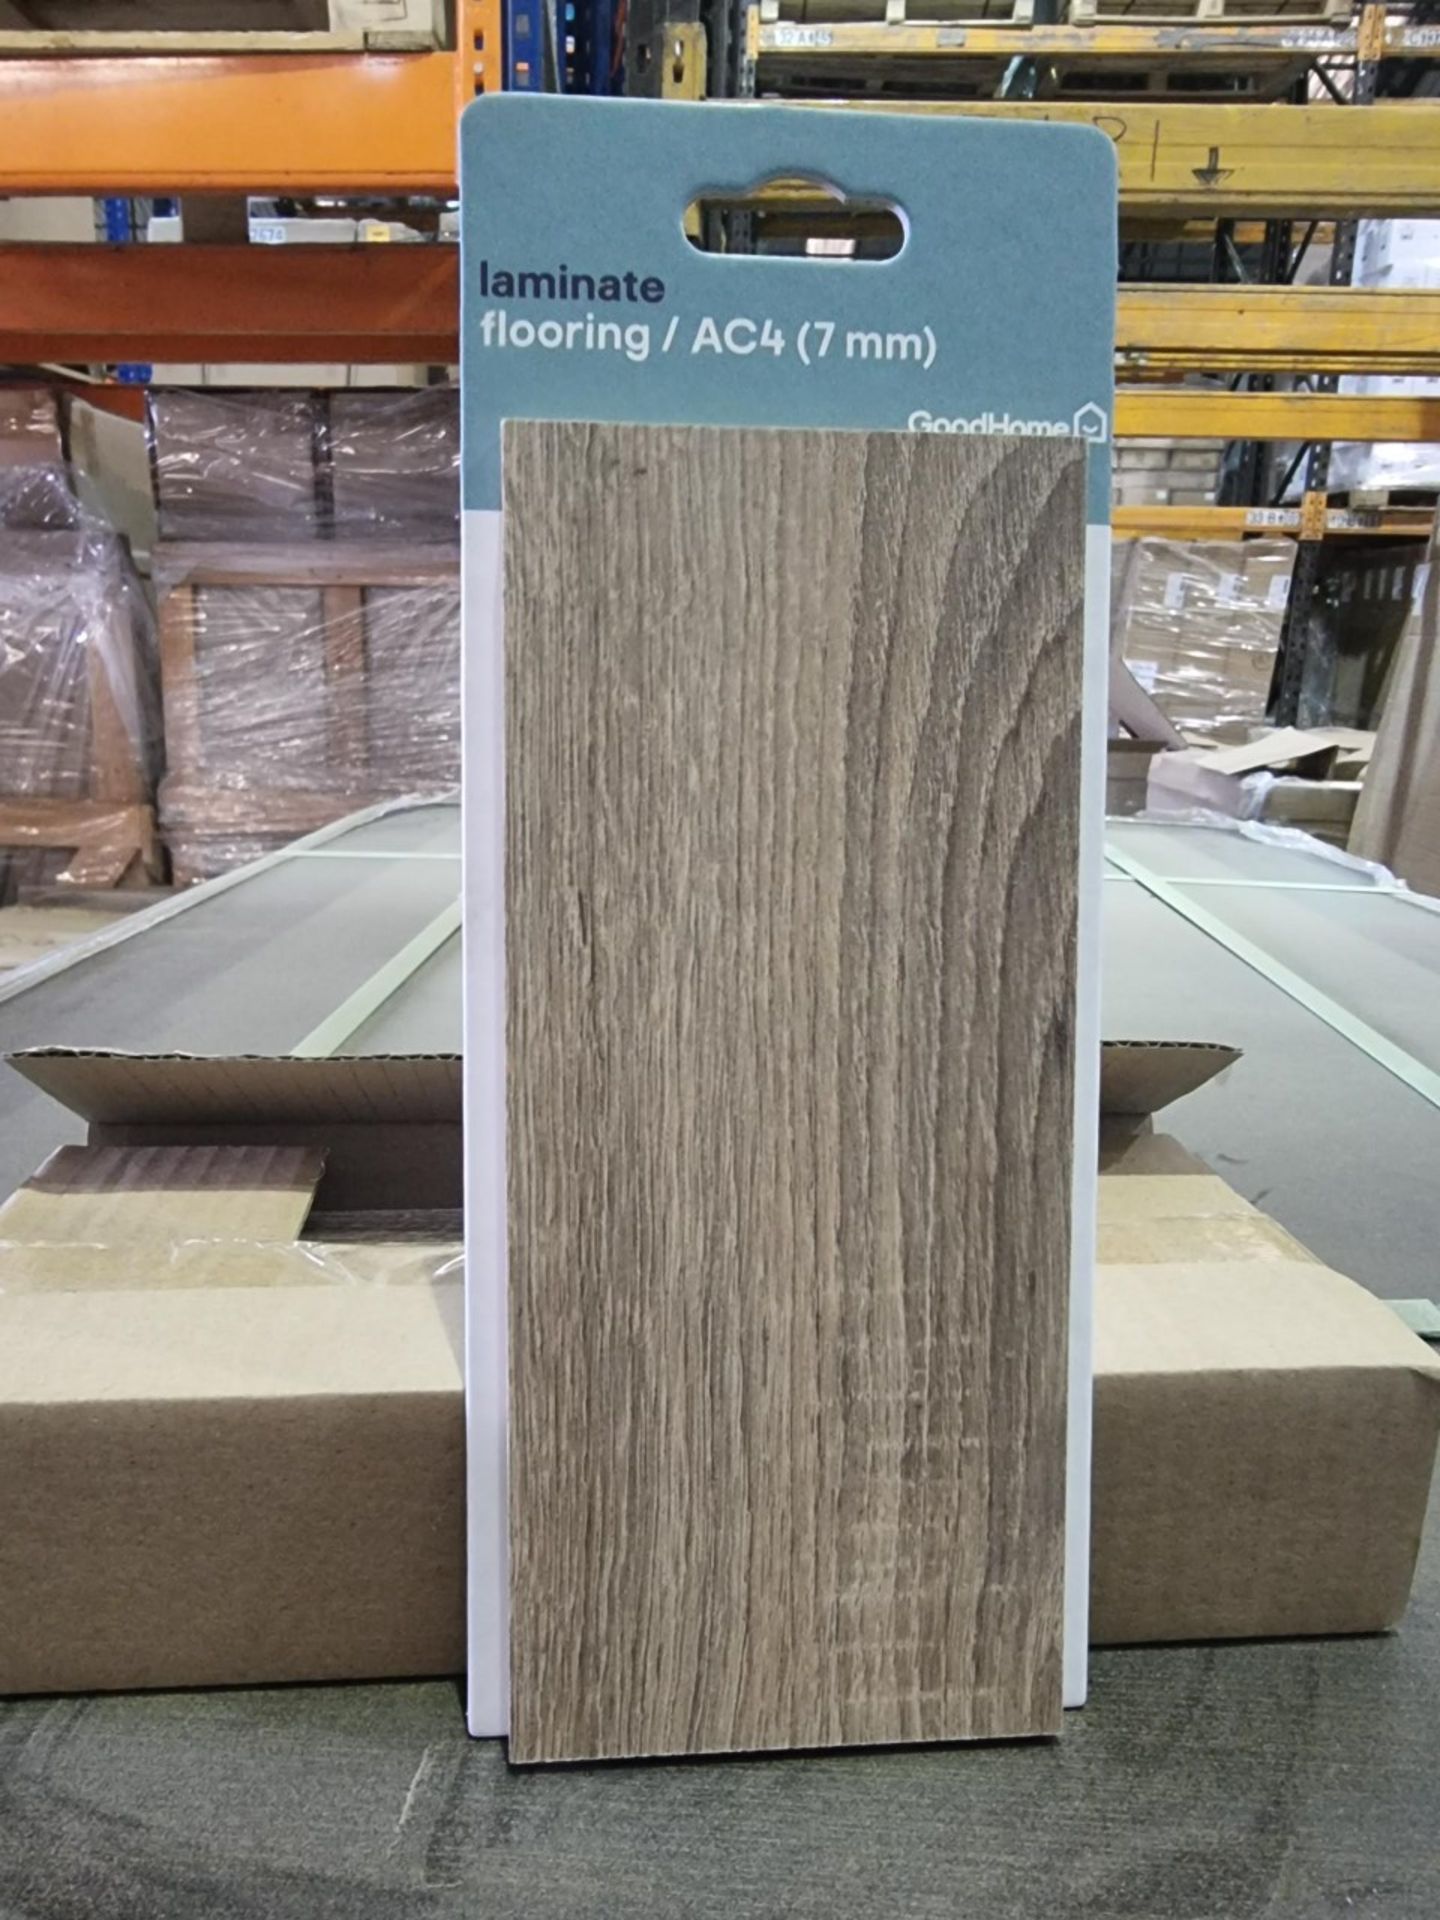 (B173) PALLET TO CONTAIN 210 BOXES OF 5 x GOODHOME LAMINATE FLOORING 7MM ALBURY LAMINATE FLOORING